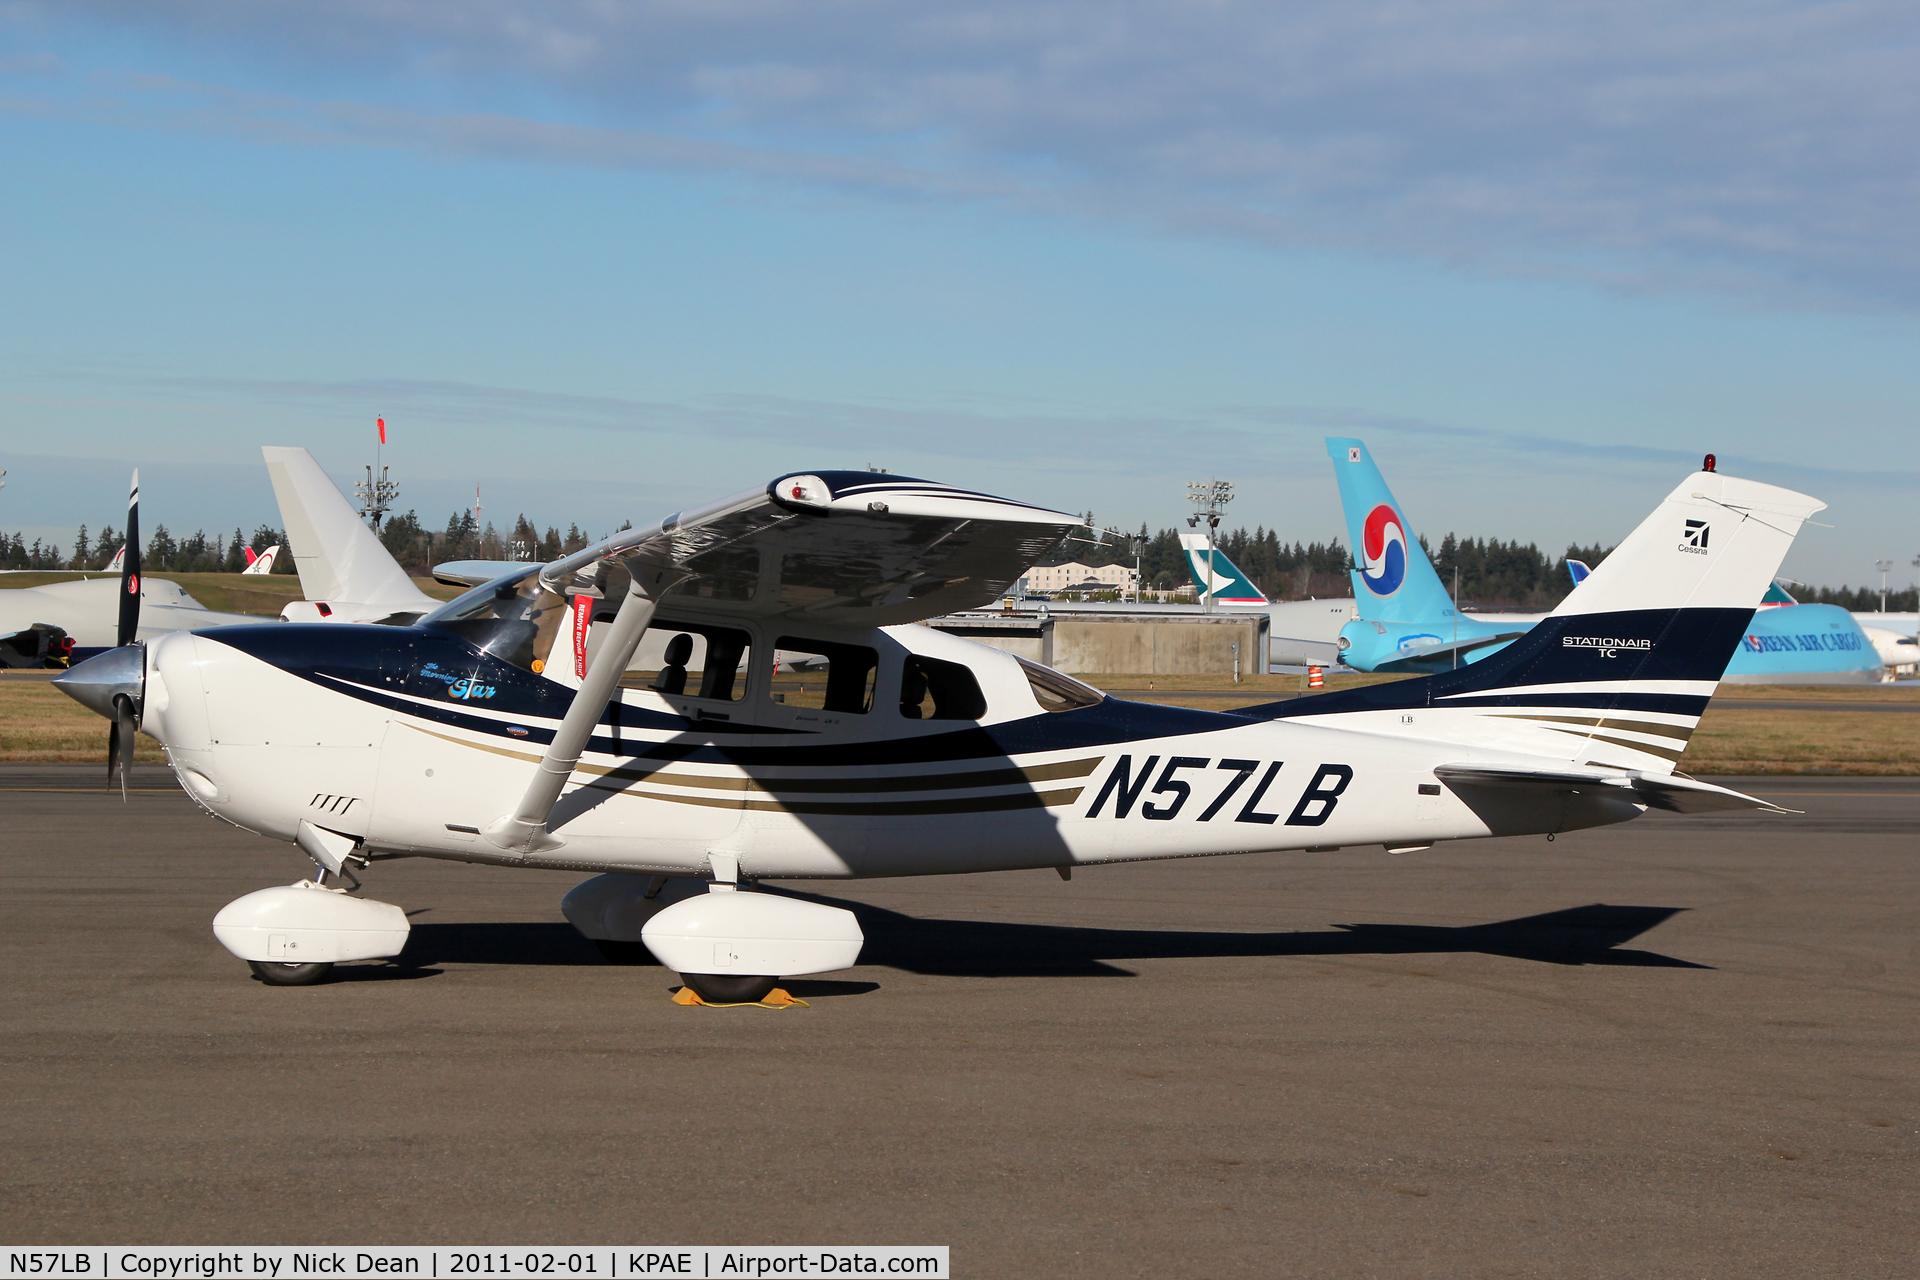 N57LB, 2005 Cessna T206H Turbo Stationair C/N T20608569, KPAE arrived from and departed back to KEUG Mahlon Sweet Field